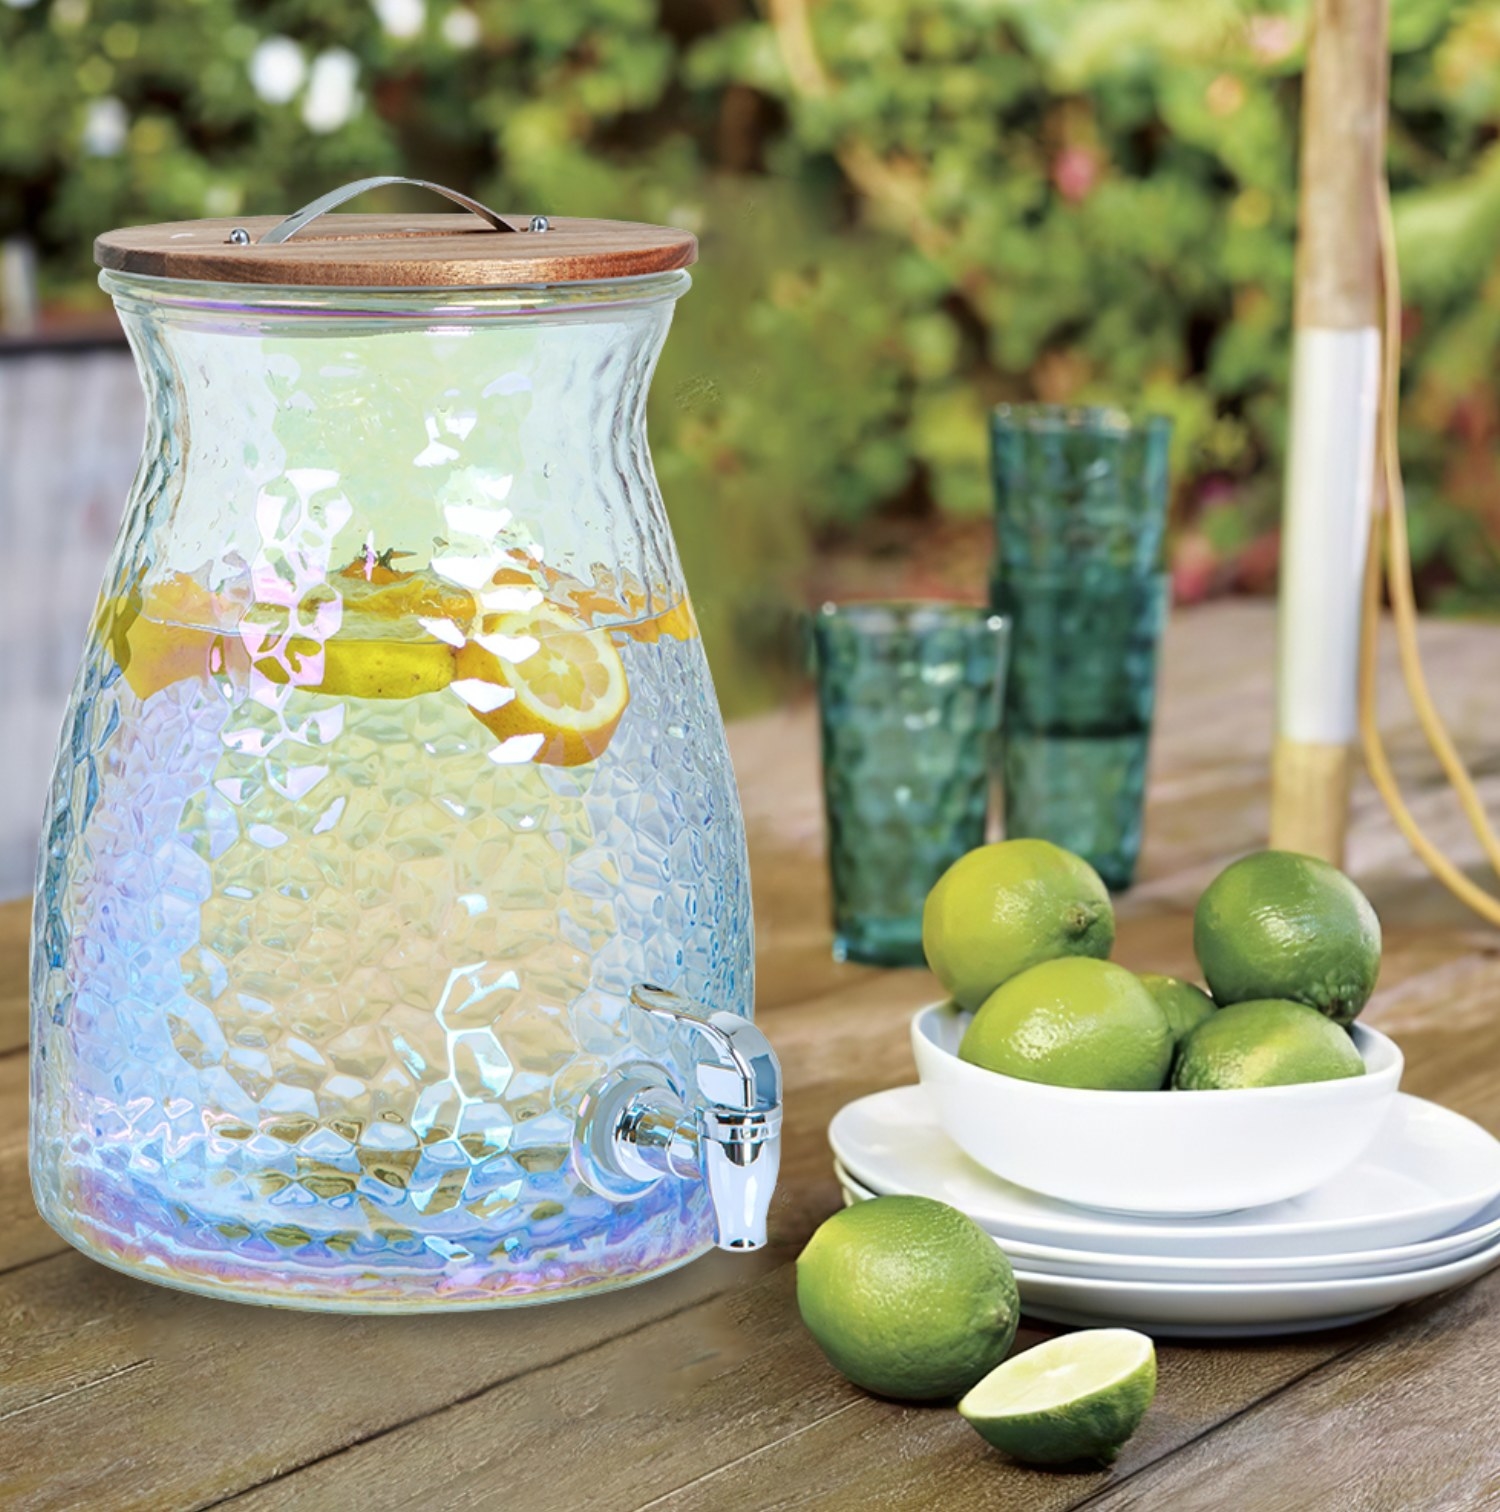 the beverage dispenser with water and lemons in it next to a bowl of limes